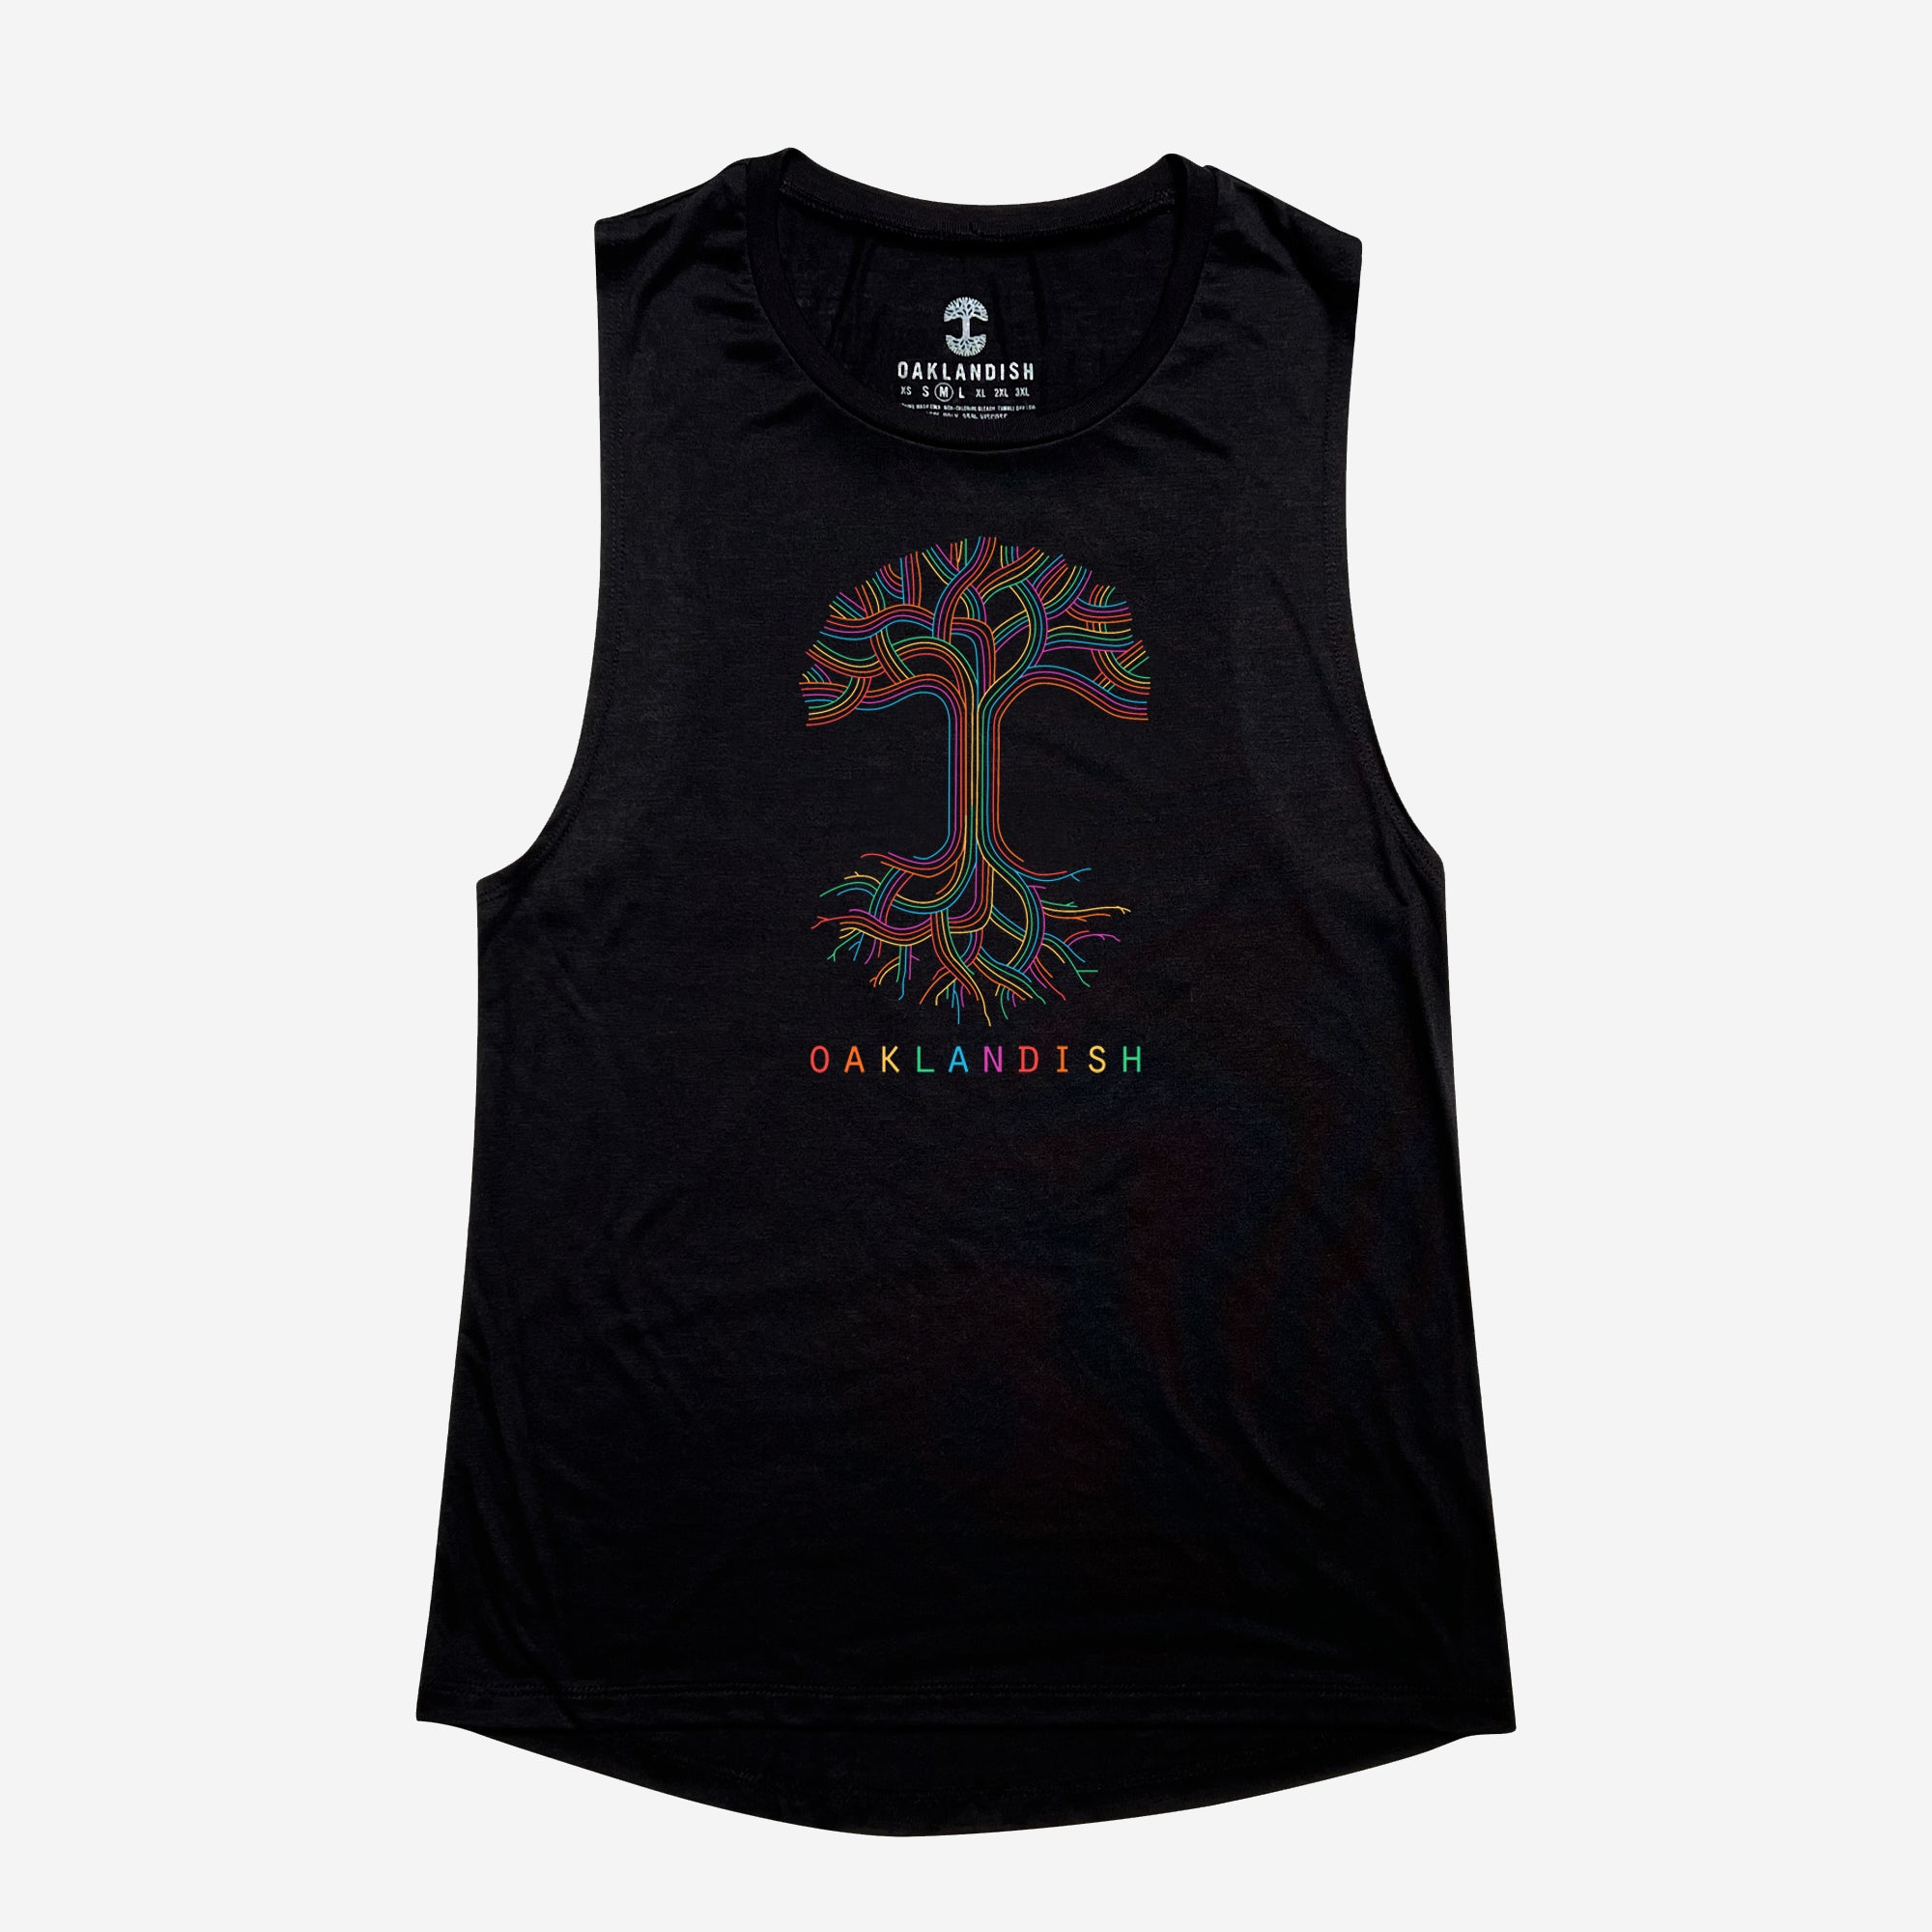 Women’s black tank top with Oaklandish Tree logo and wordmark in rainbow colors for pride month.